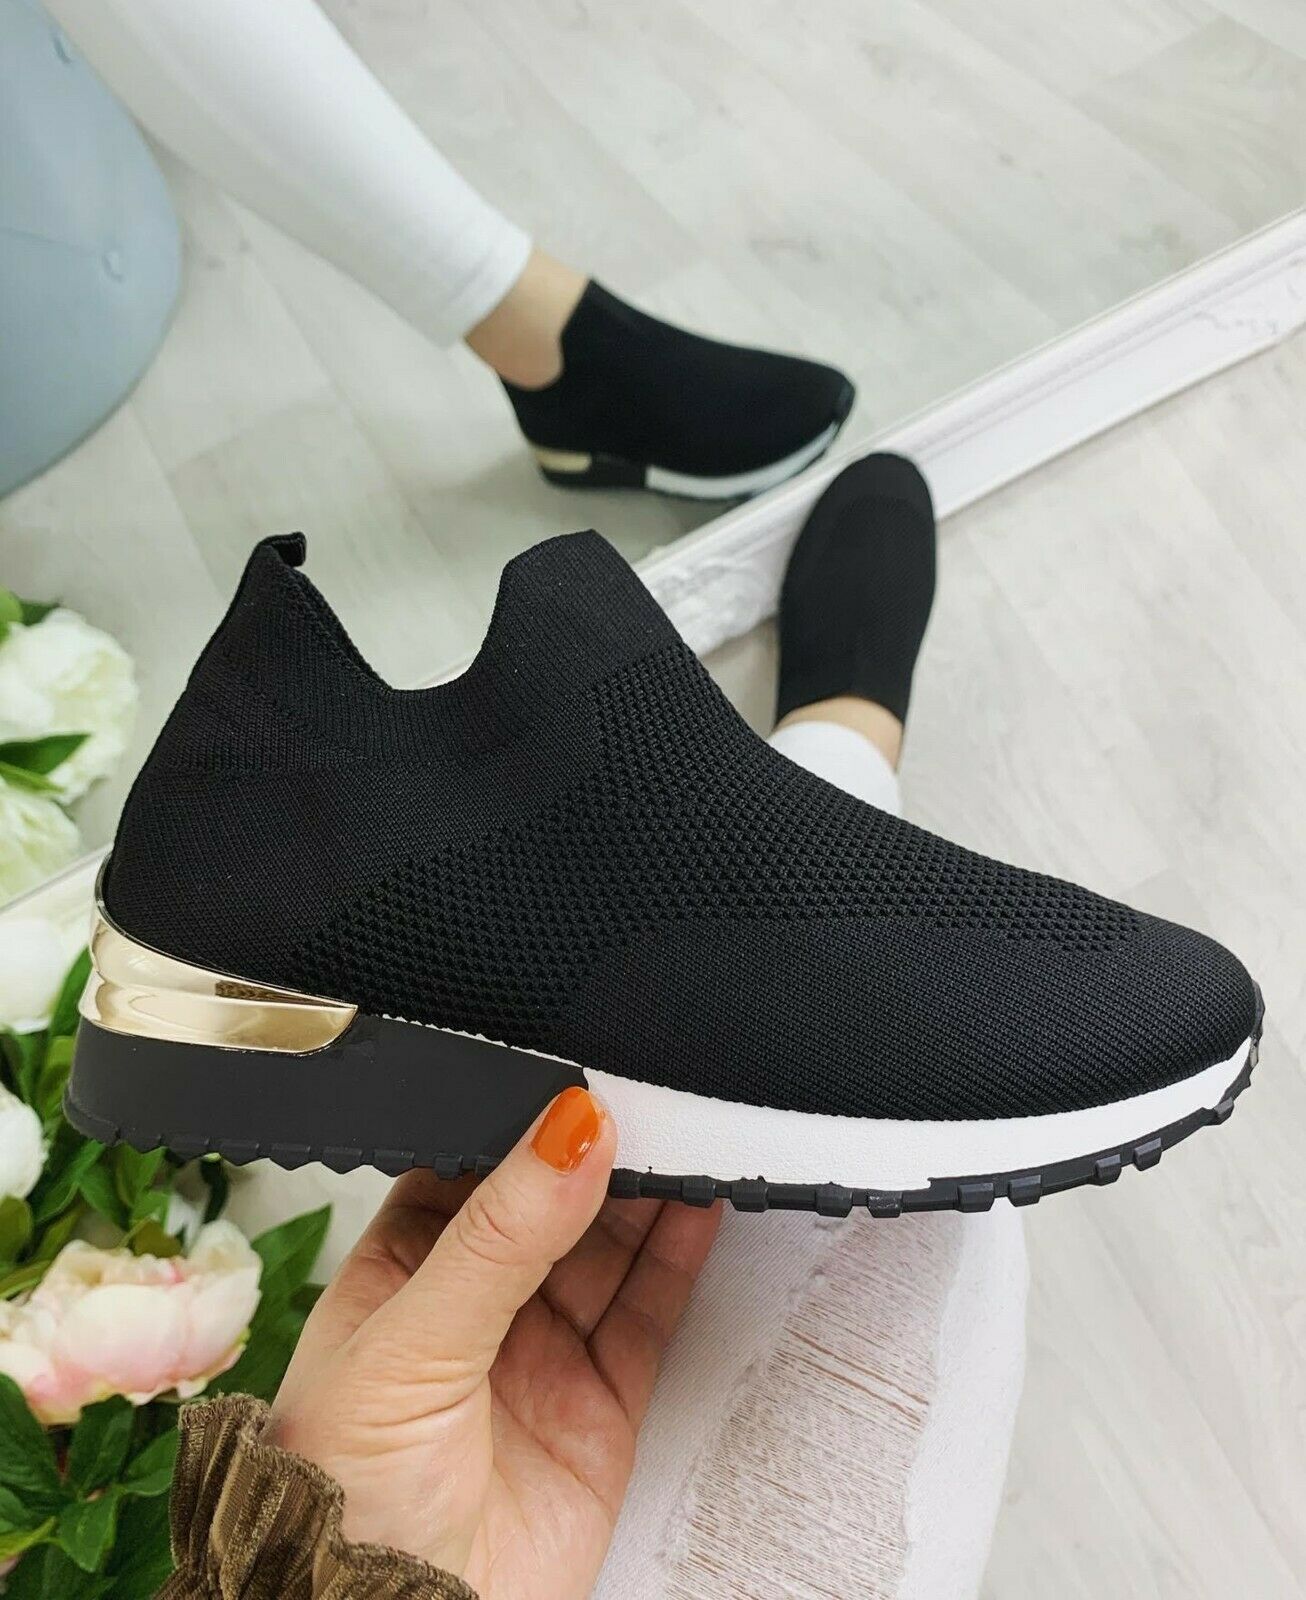 UK Size 8 EUR Size 41 Black Ladies Womens Slip on Sock Wedge Sneakers Classic Jogging Pumps Shoes Trainers